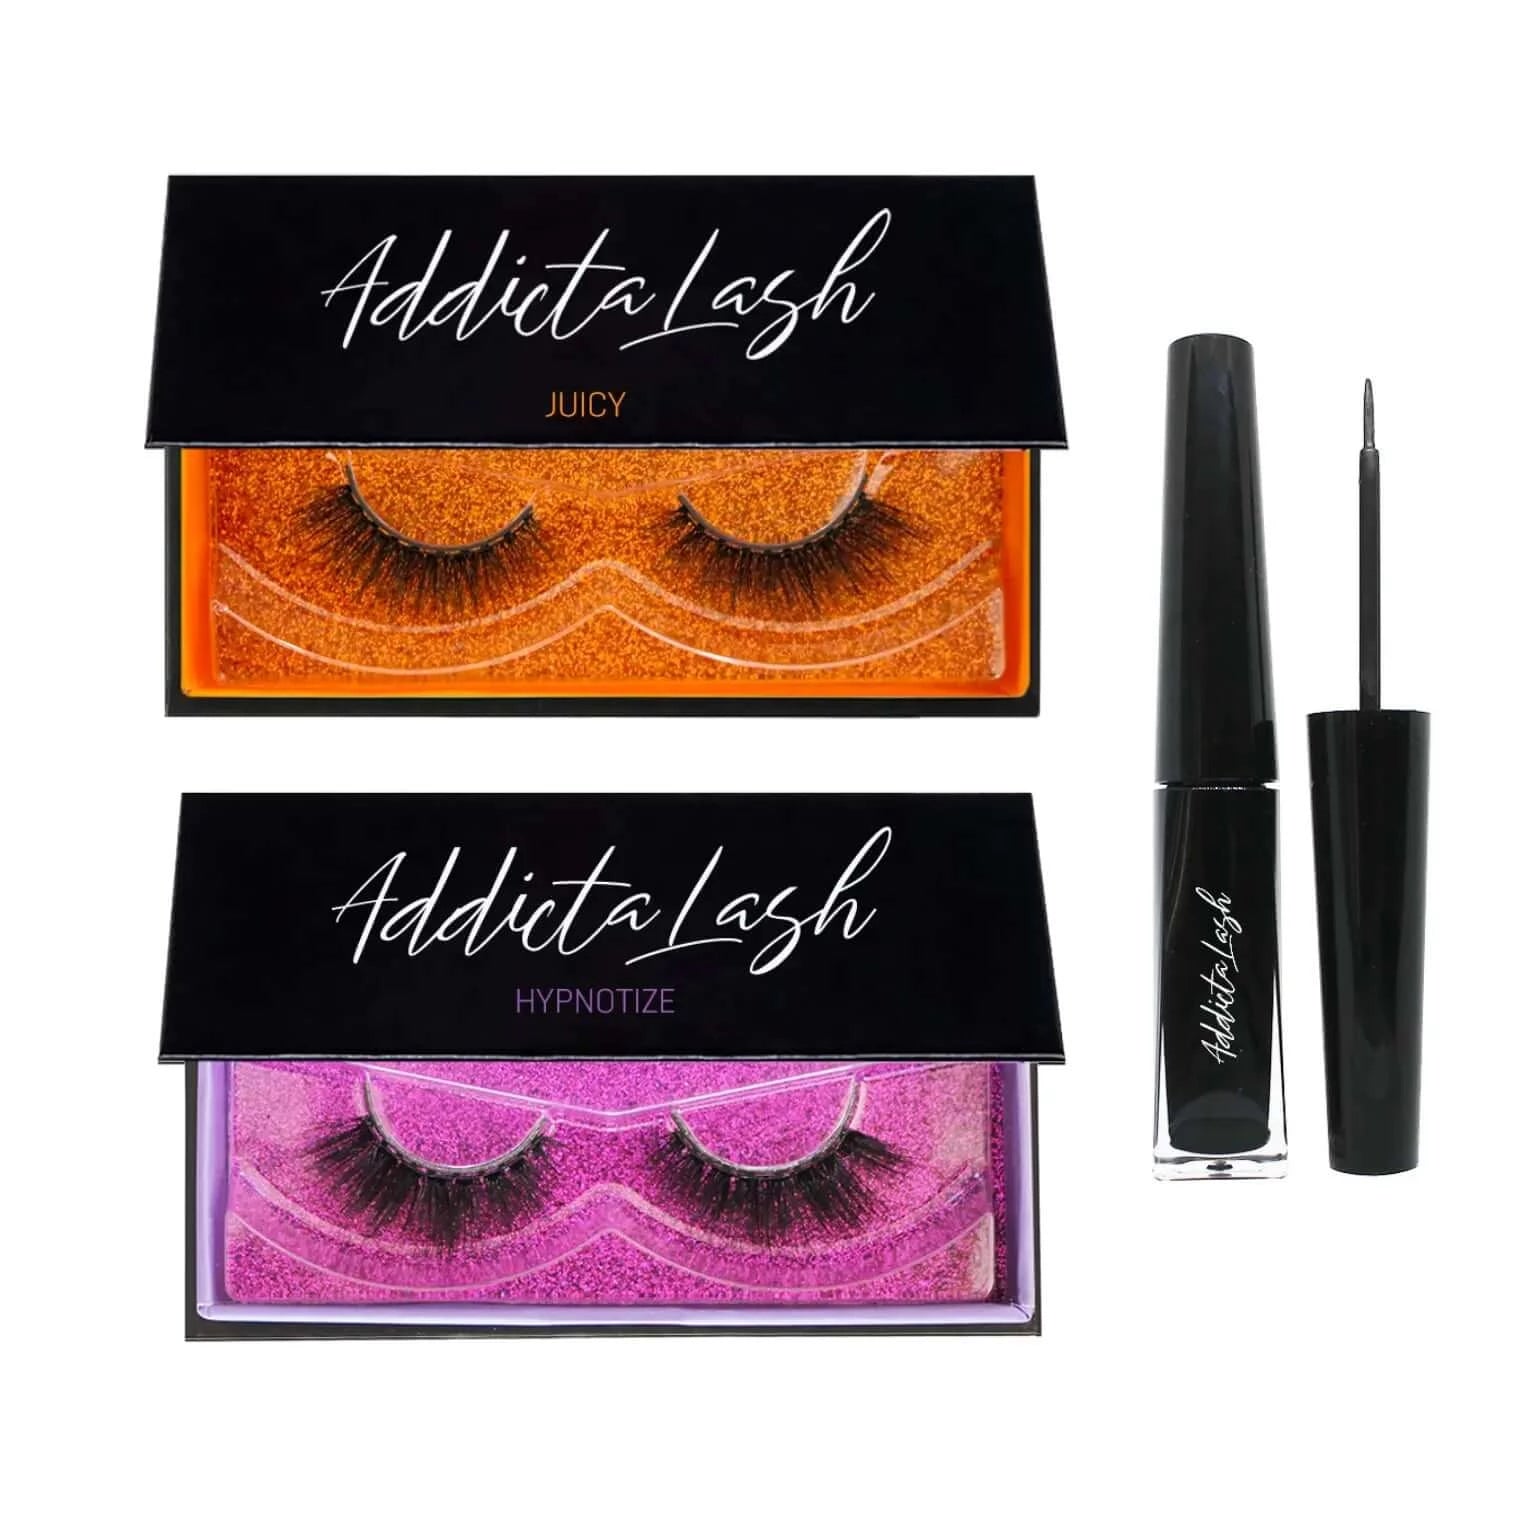 The best Magnetic lashes in Australia for a dramatic style lashes